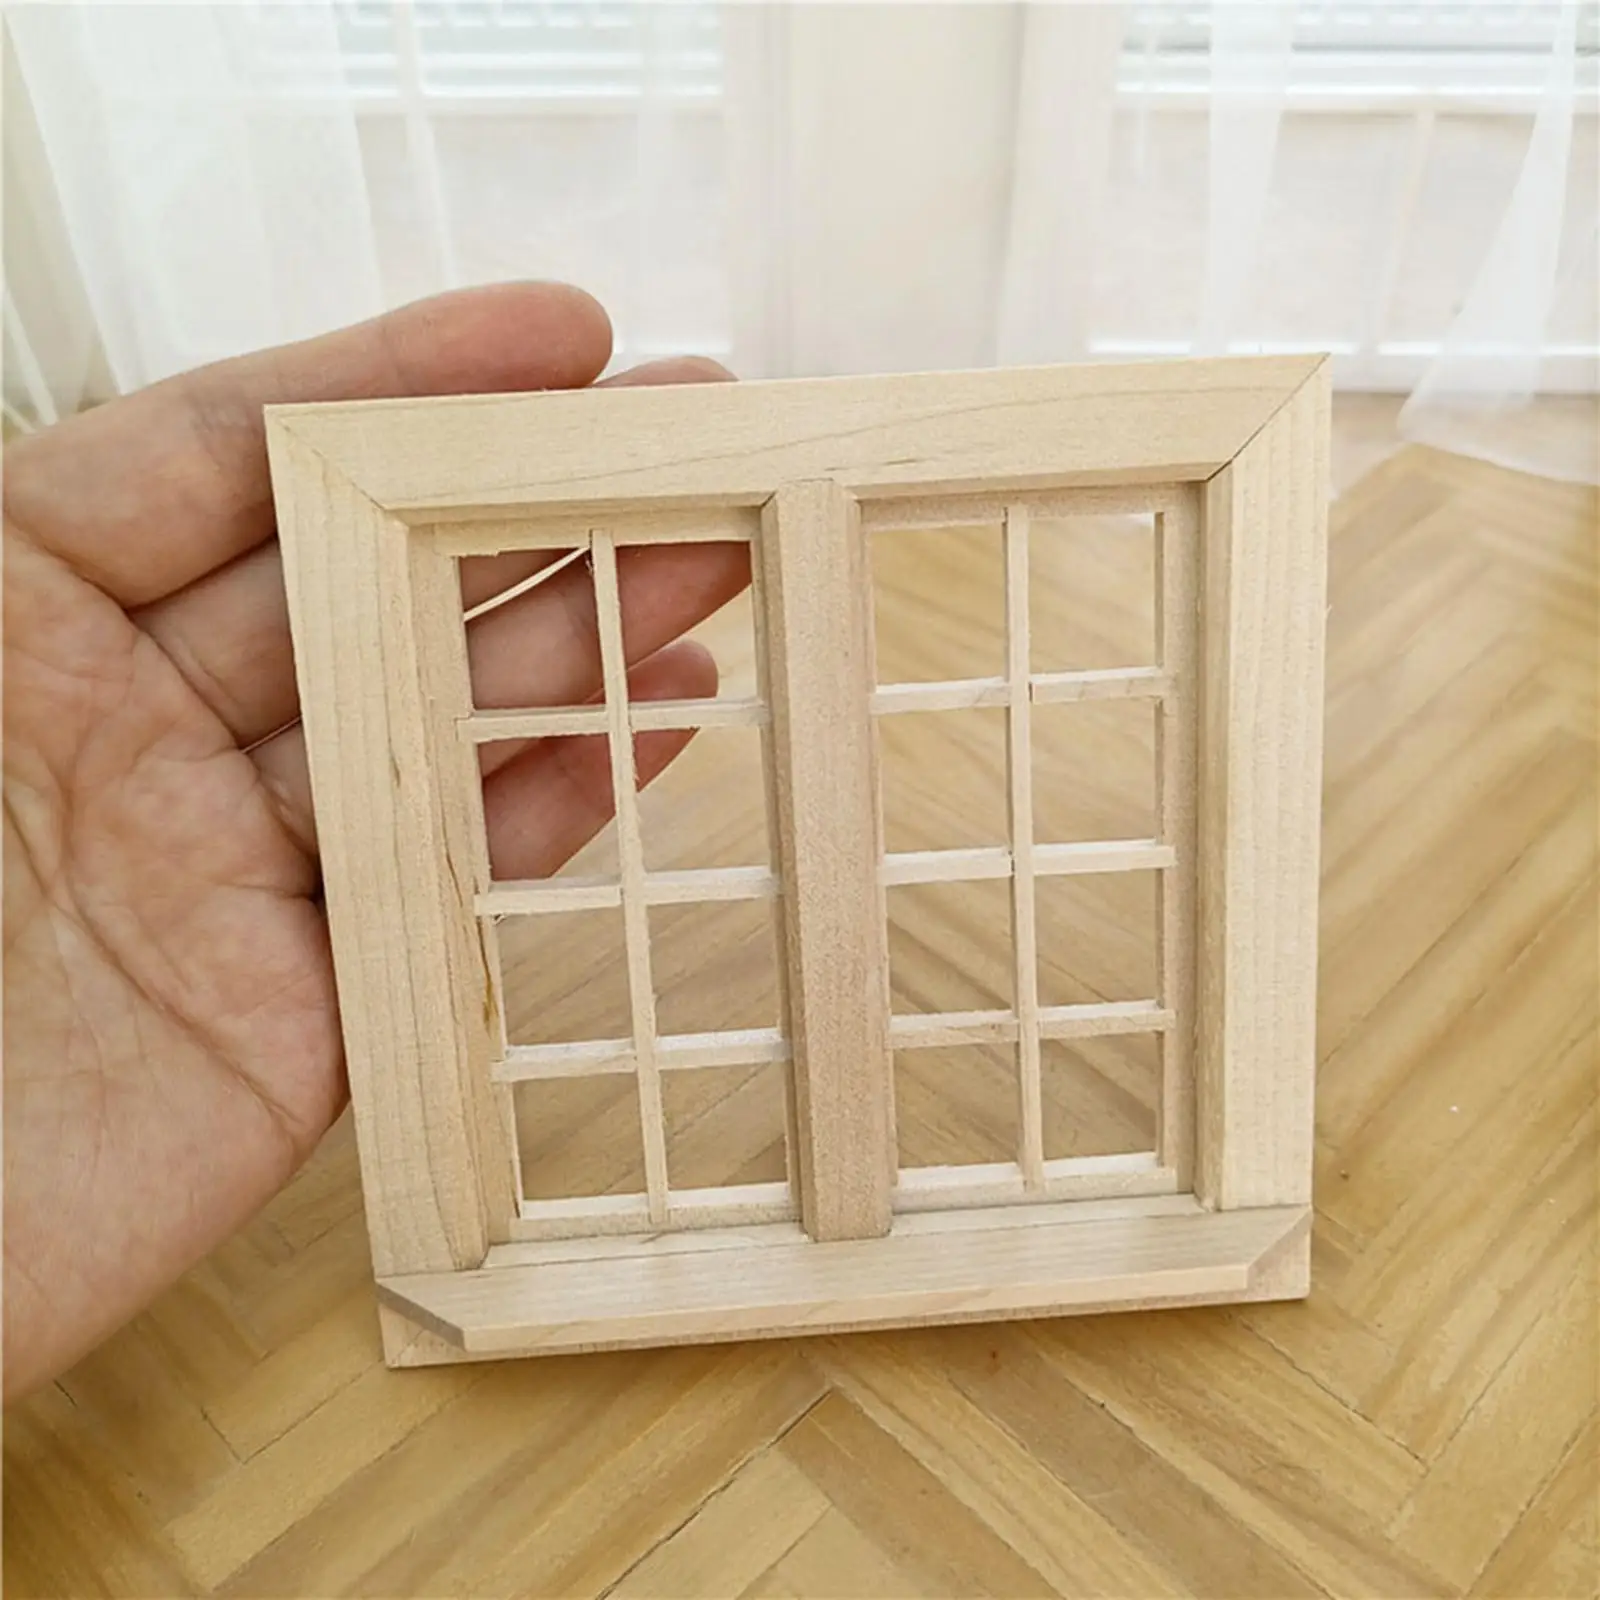 Wooden Dollhouse Miniature Window Decoration Kids Toys 16 Panel for Bedroom